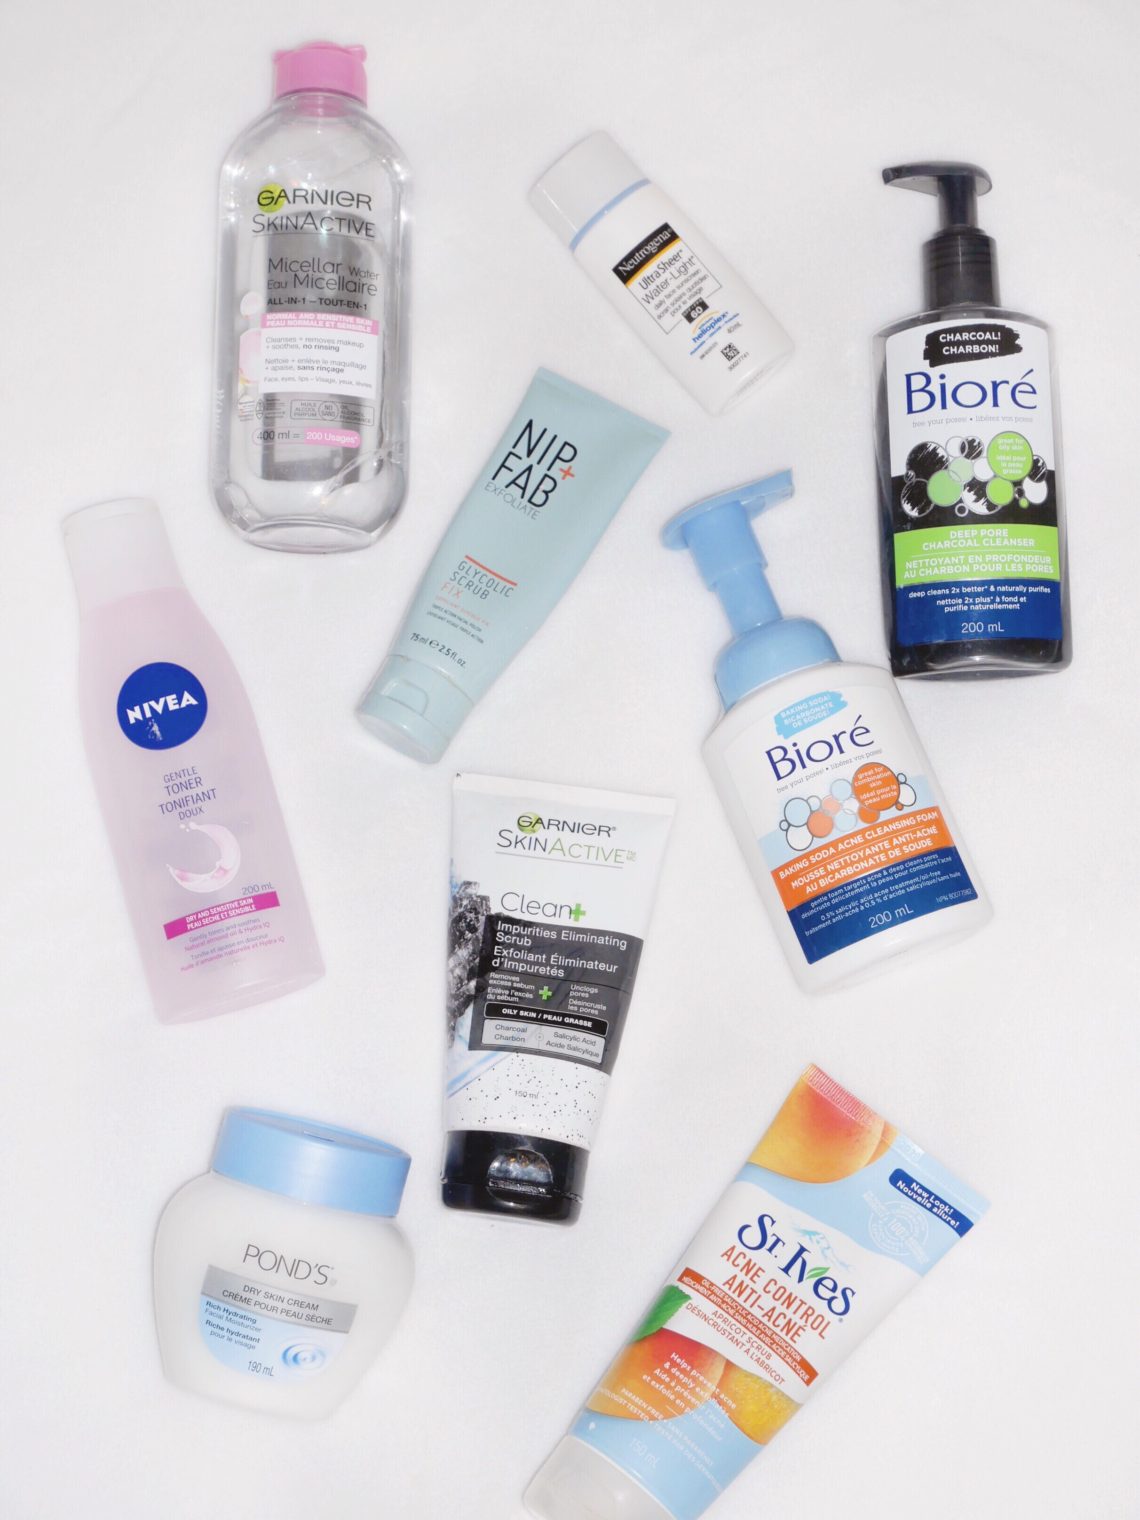 alt="top ten cheap drugstore skincare products that works"